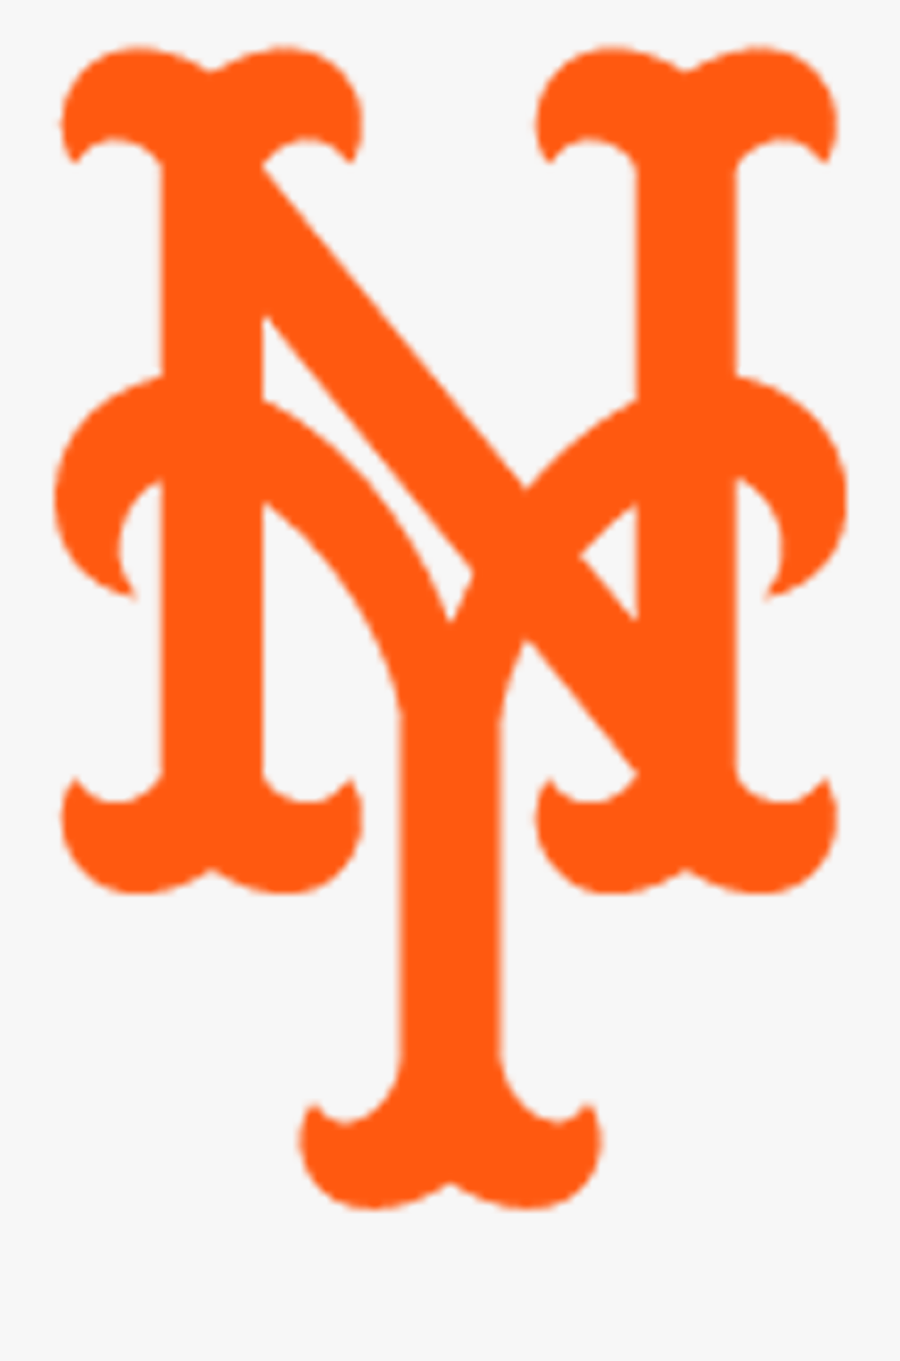 Meet The 2016 Mets - New York Mets Logo Png, Transparent Clipart